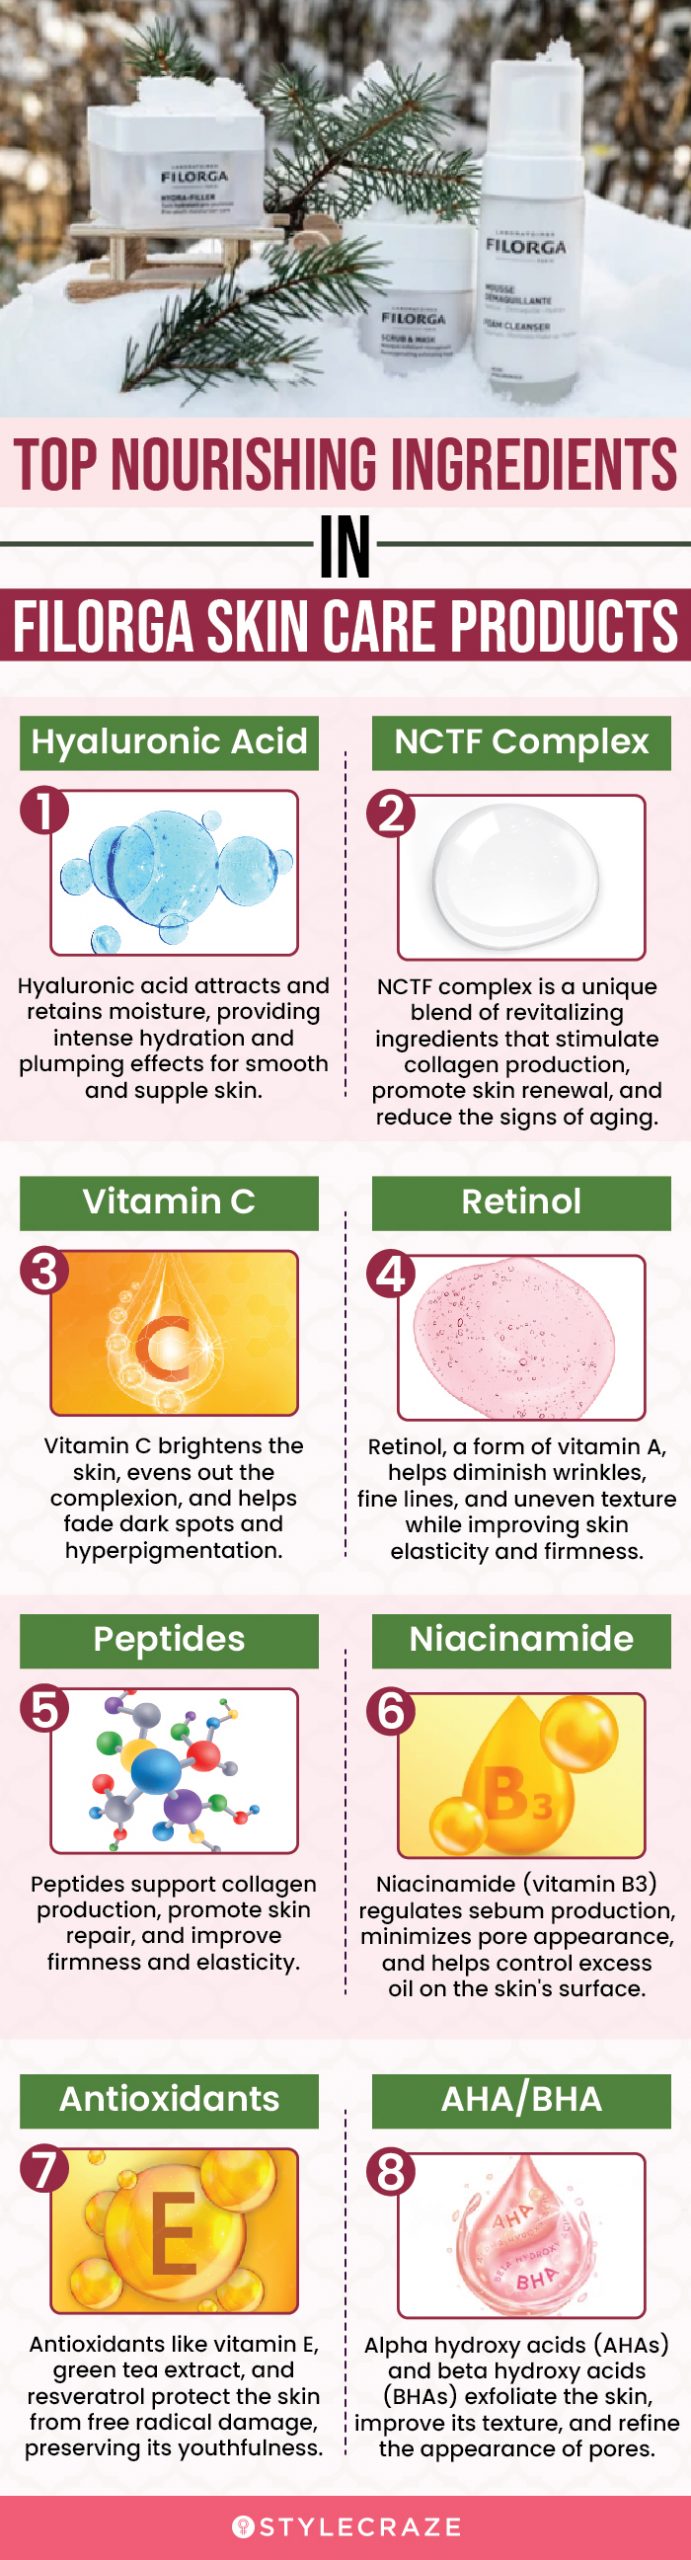 Top Nourishing Ingredients In Filorga Skin Care Products(infographic)